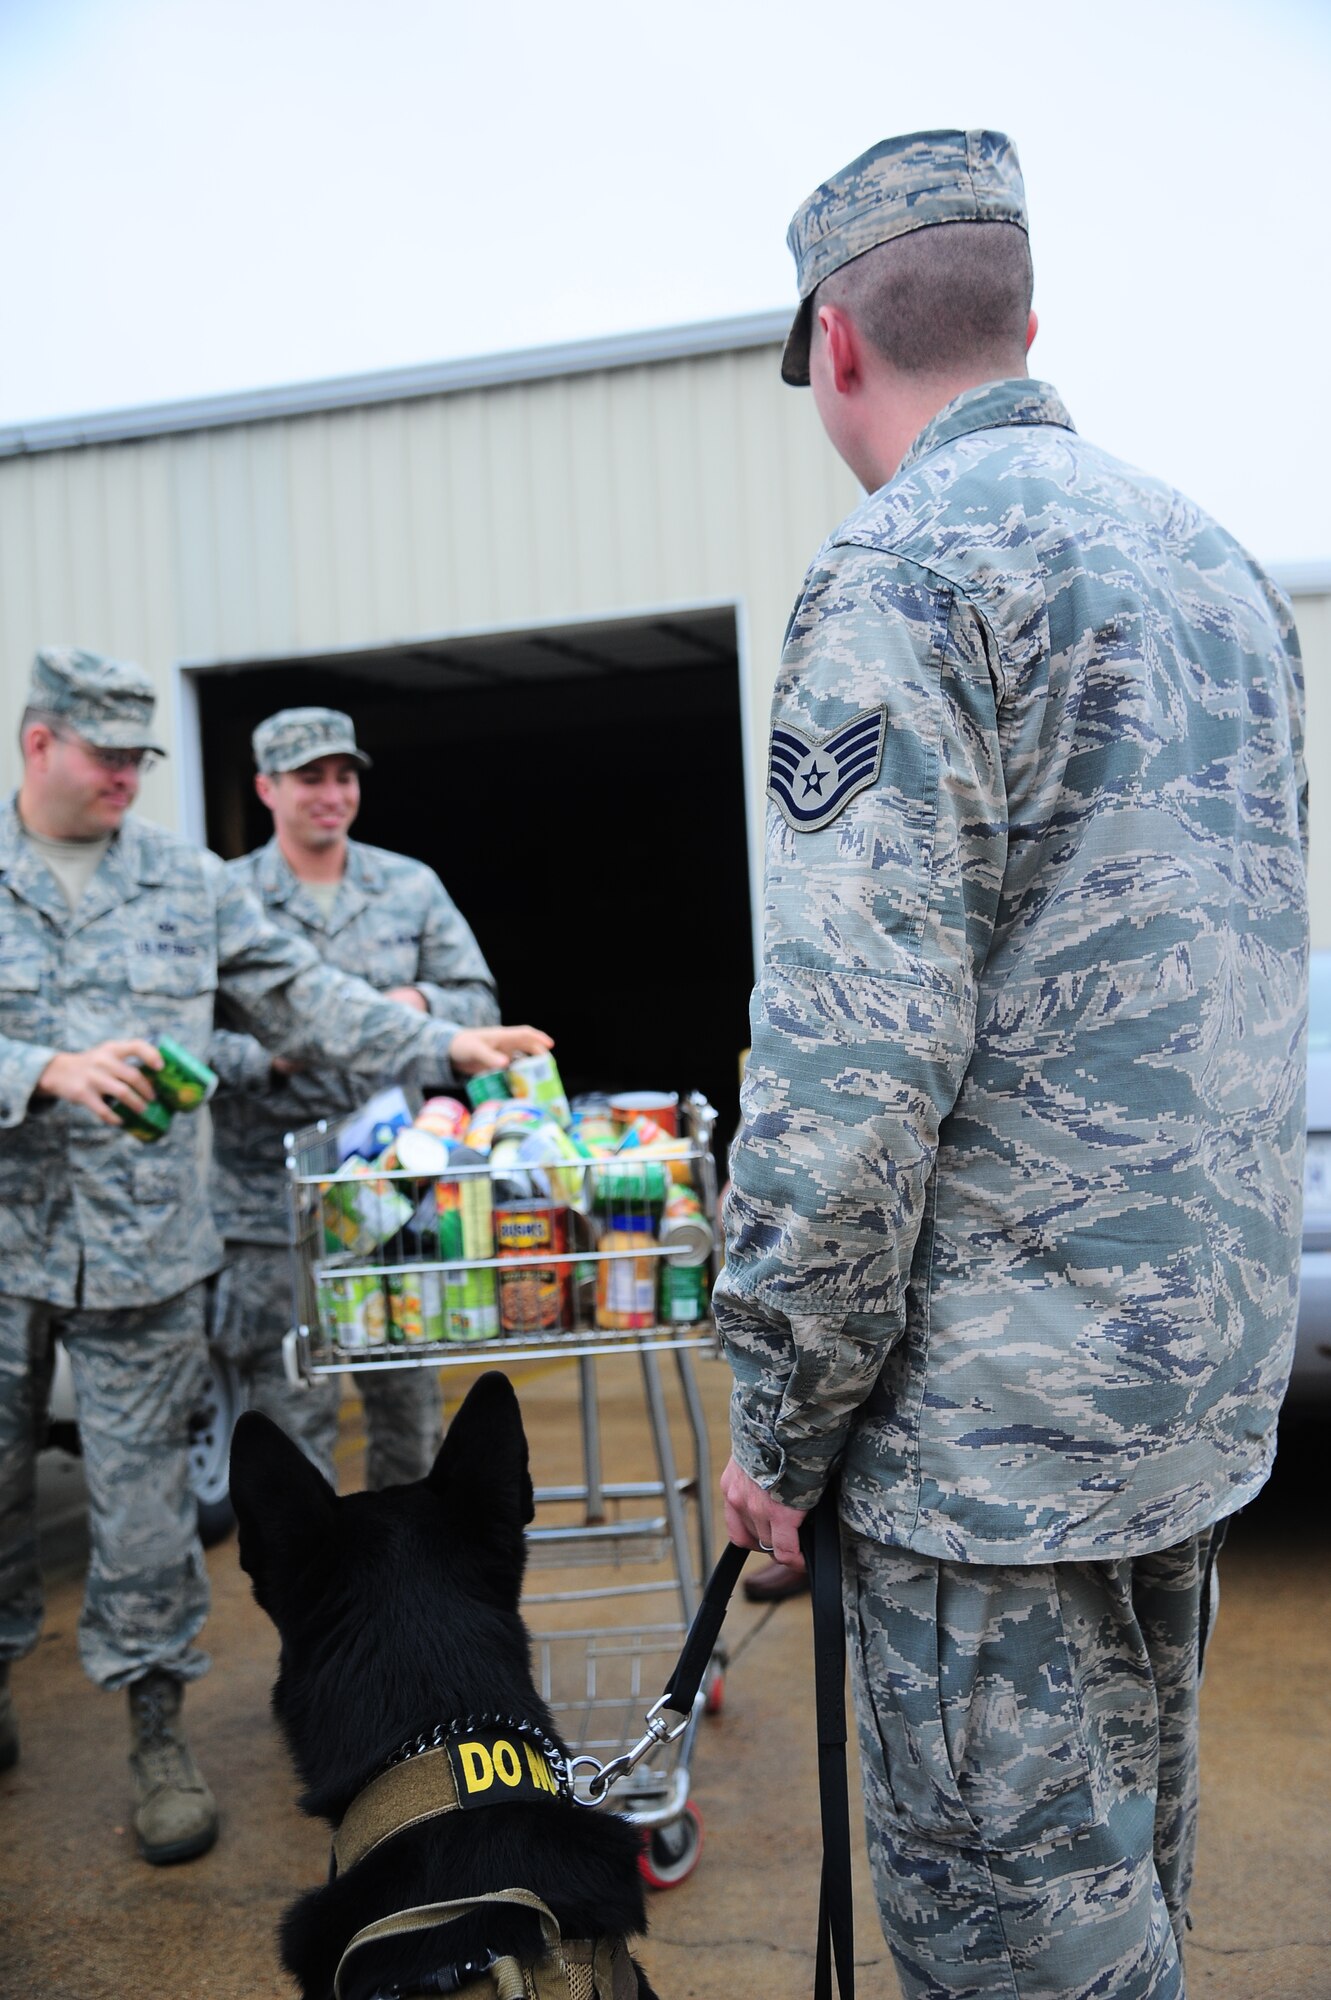 Tech. Sgt. Bryan Franks, 14th Flying Training Wing Public Affairs, and 2nd Lt. Cory Concha, 14th Student Squadron, collect cans from the Military Working Dog Demonstration to be donated to the United Way Nov. 22. One can of food was the entrance fee to the demonstration.  (U.S. Air Force Photo/Airman 1st Class Daniel Lile)